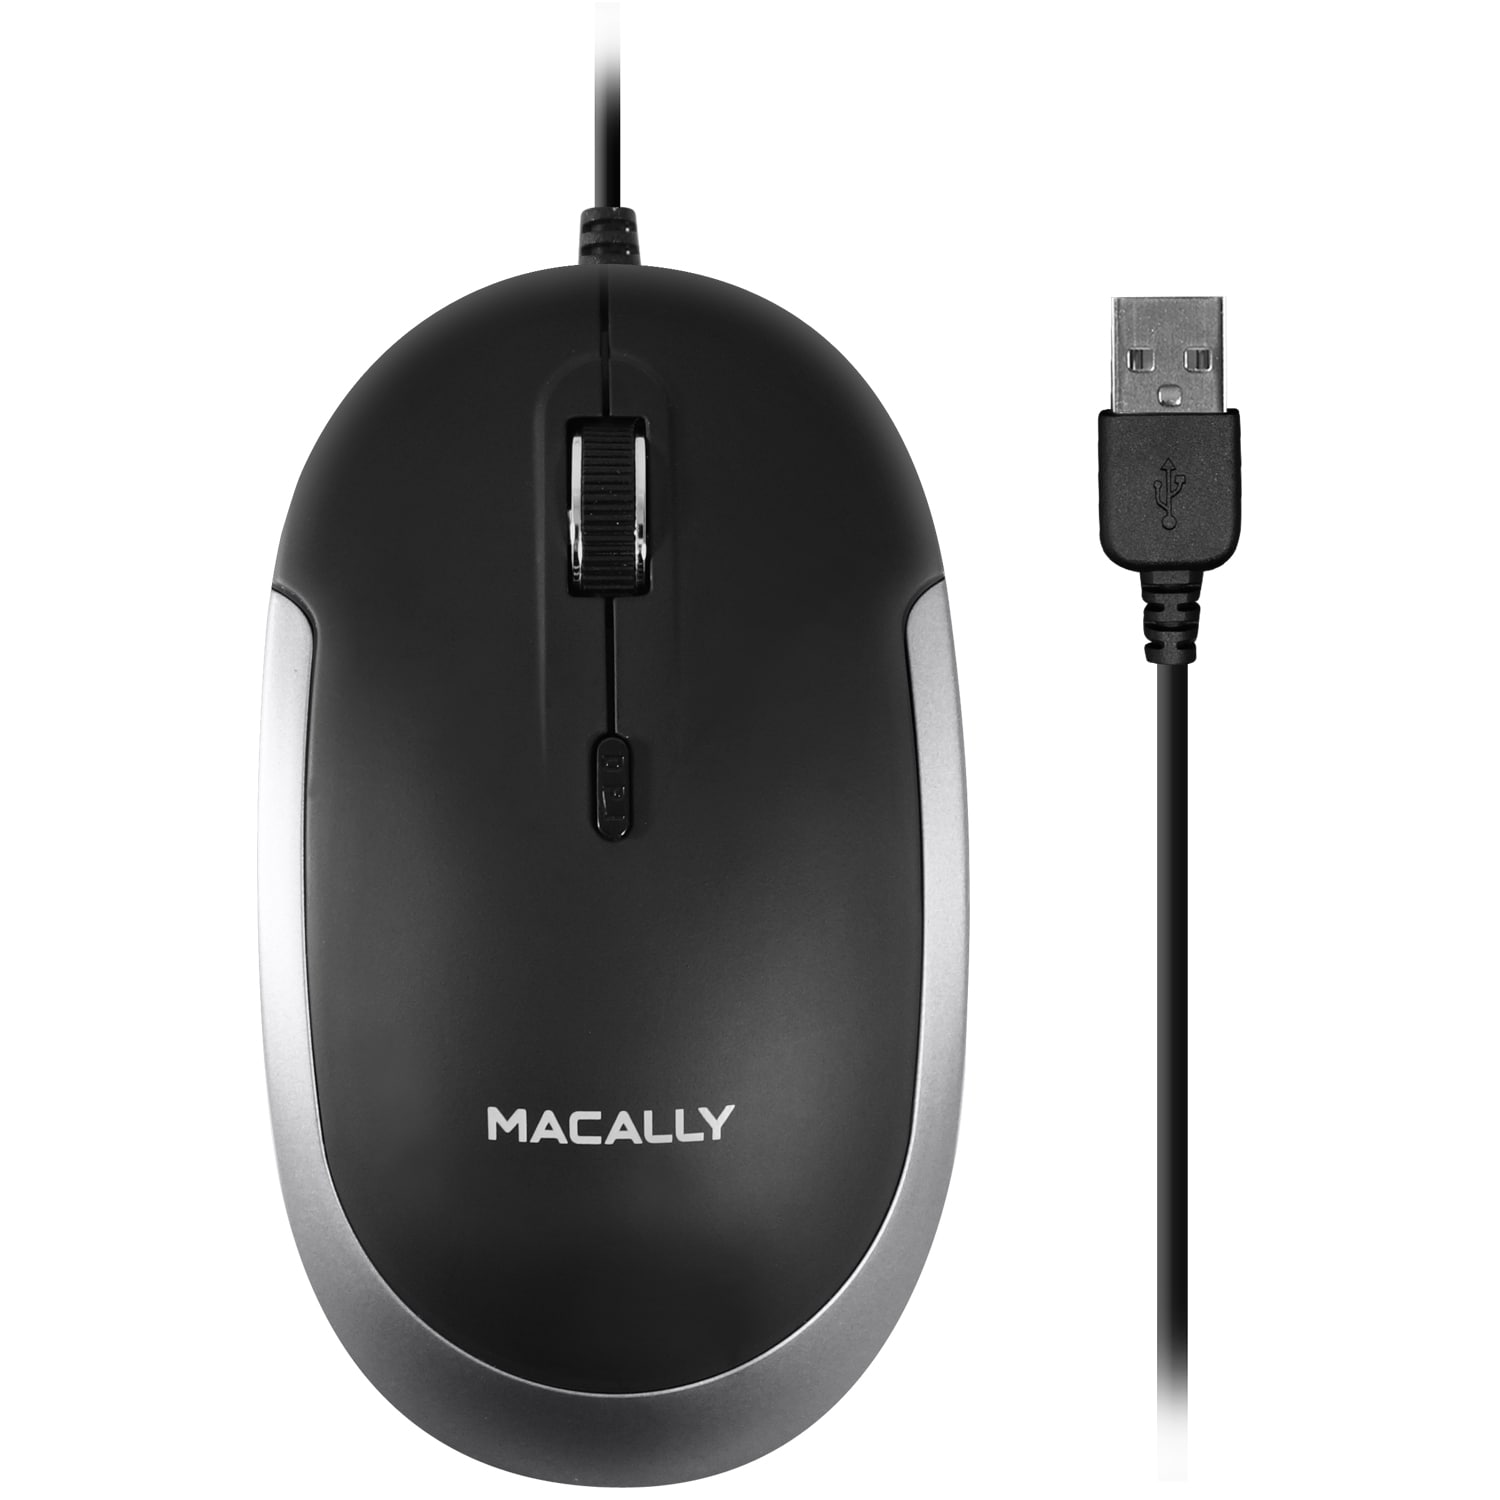 Sprong bovenste nakomelingen Macally Macally Silent USB Mouse Wired for Apple Mac or Windows PC  Laptop/Desktop Computer | Slim and Compact Mice Design with Optical Sensor  and DPI Switch 800/1200/1600/2400 | Small for Easy Travel (